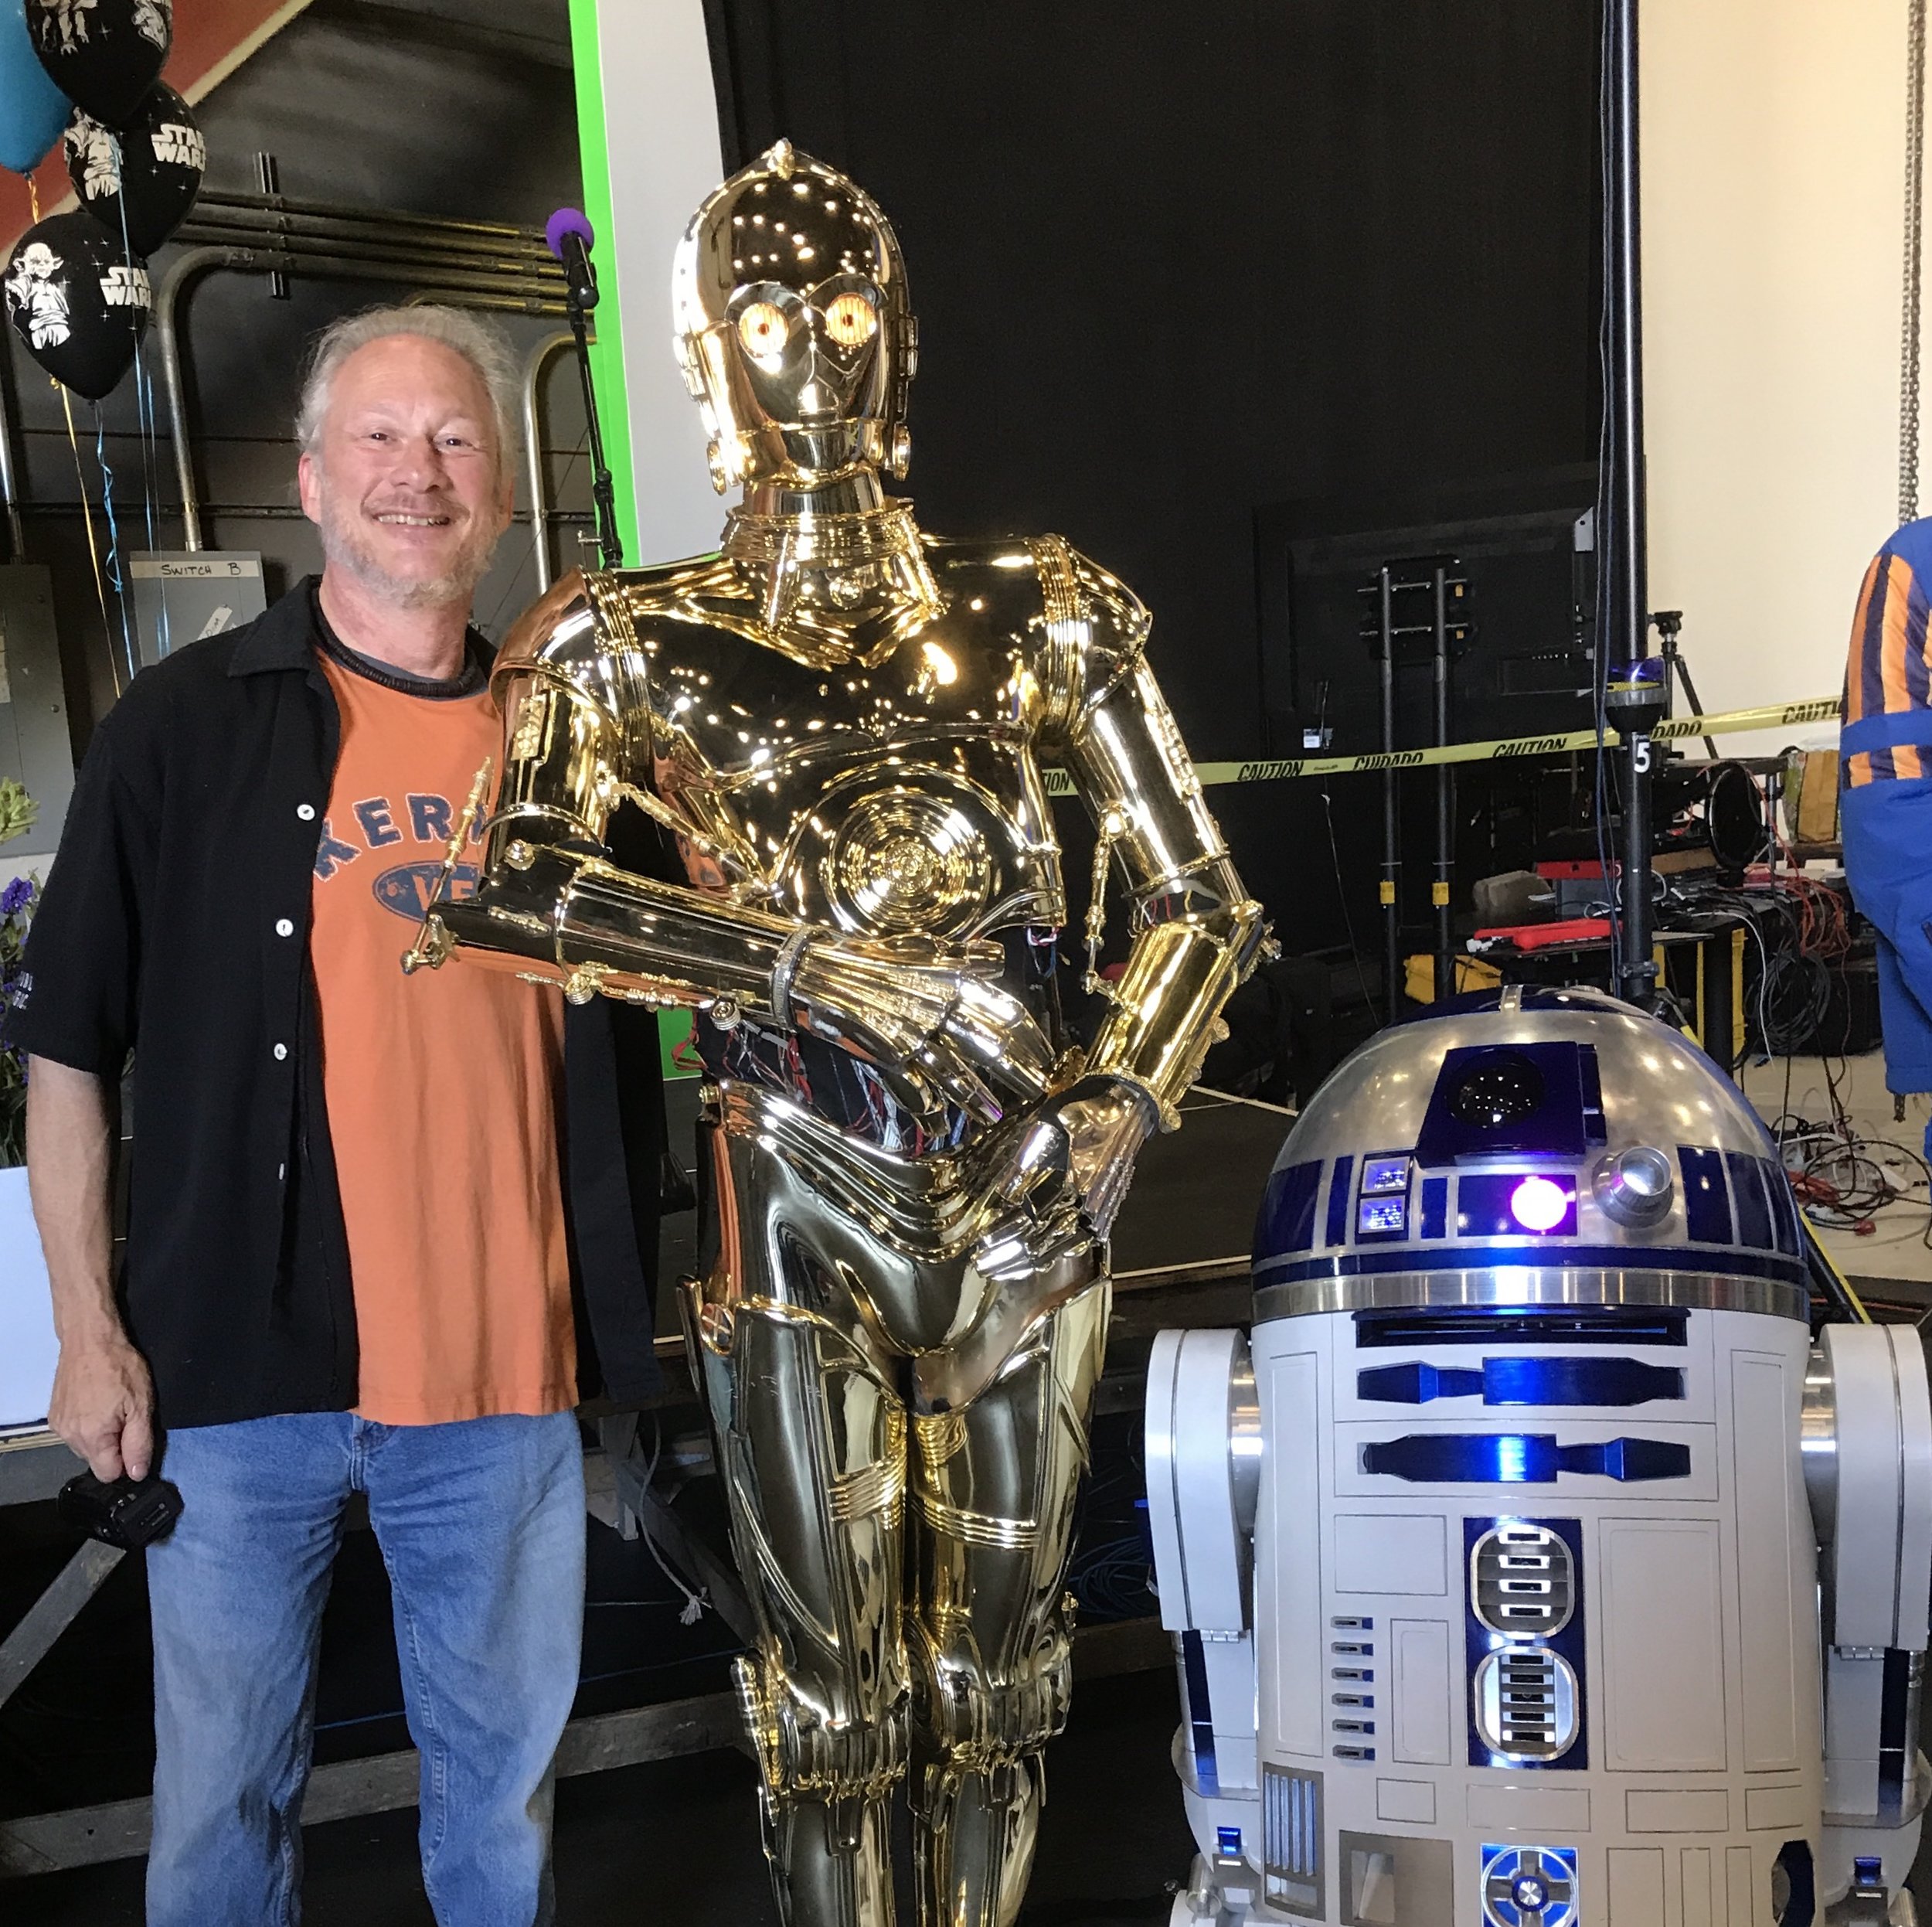 Ed Kramer with droids